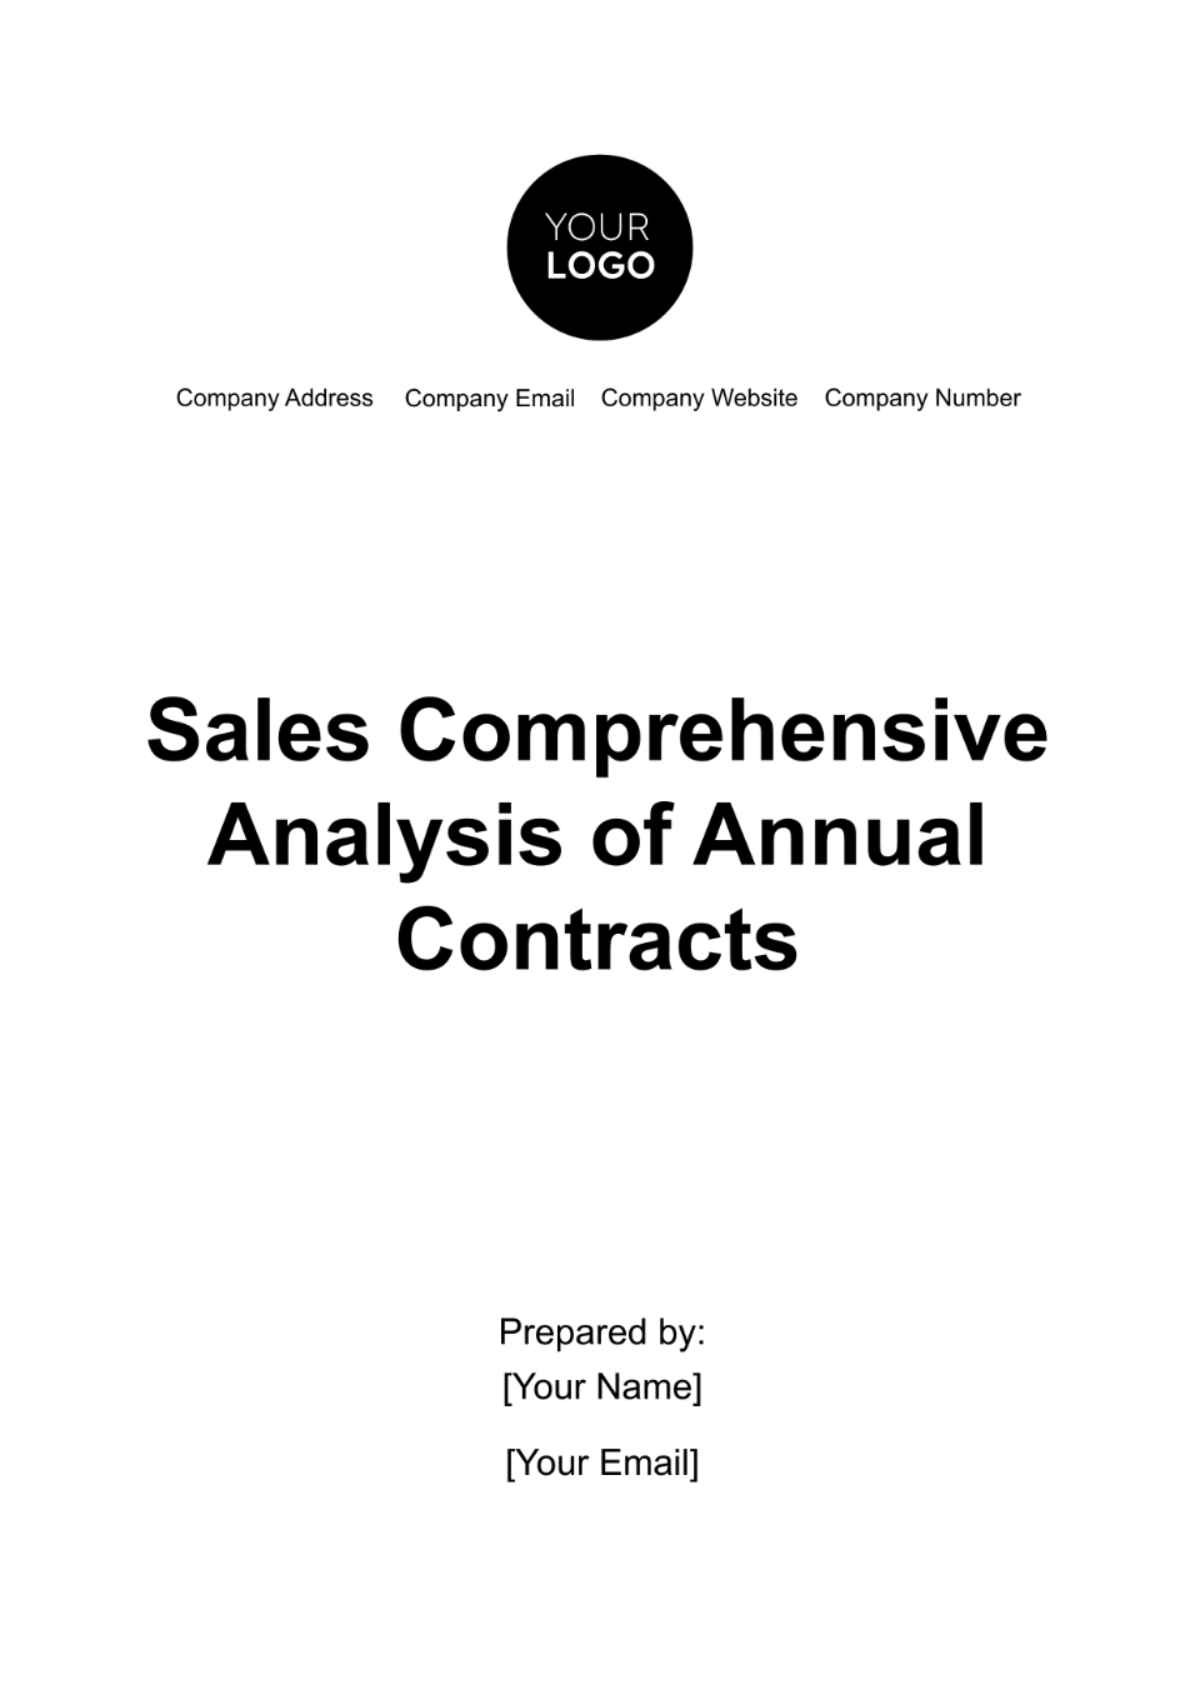 Free Sales Comprehensive Analysis of Annual Contracts Template